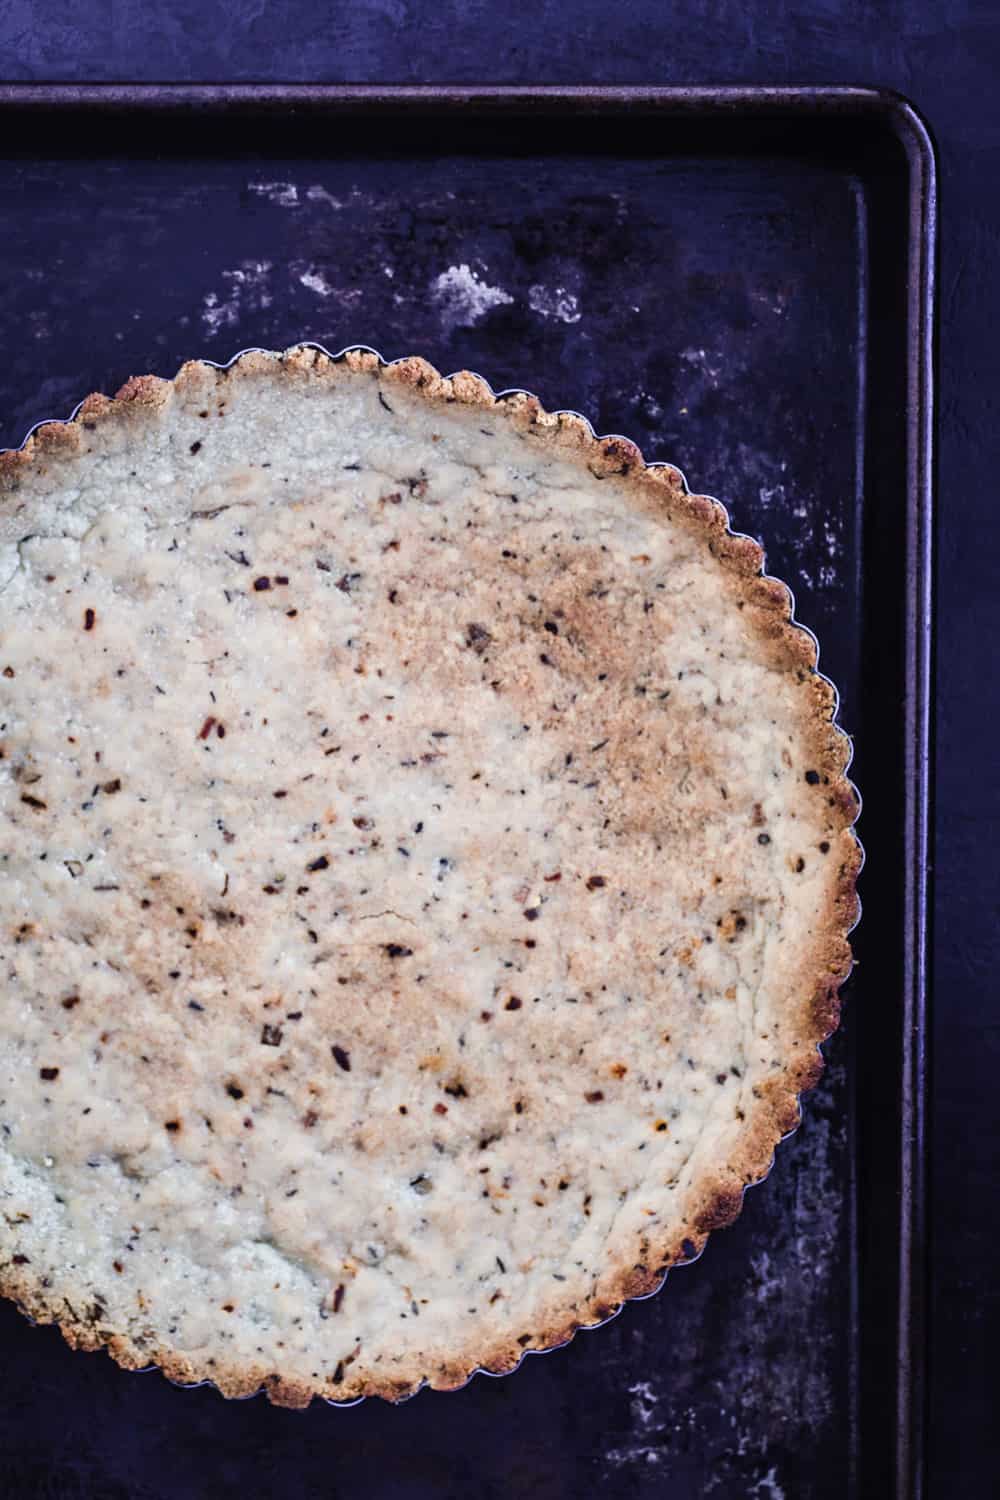 Gluten-free garlic and herb crust, par baked ready to be filled up!